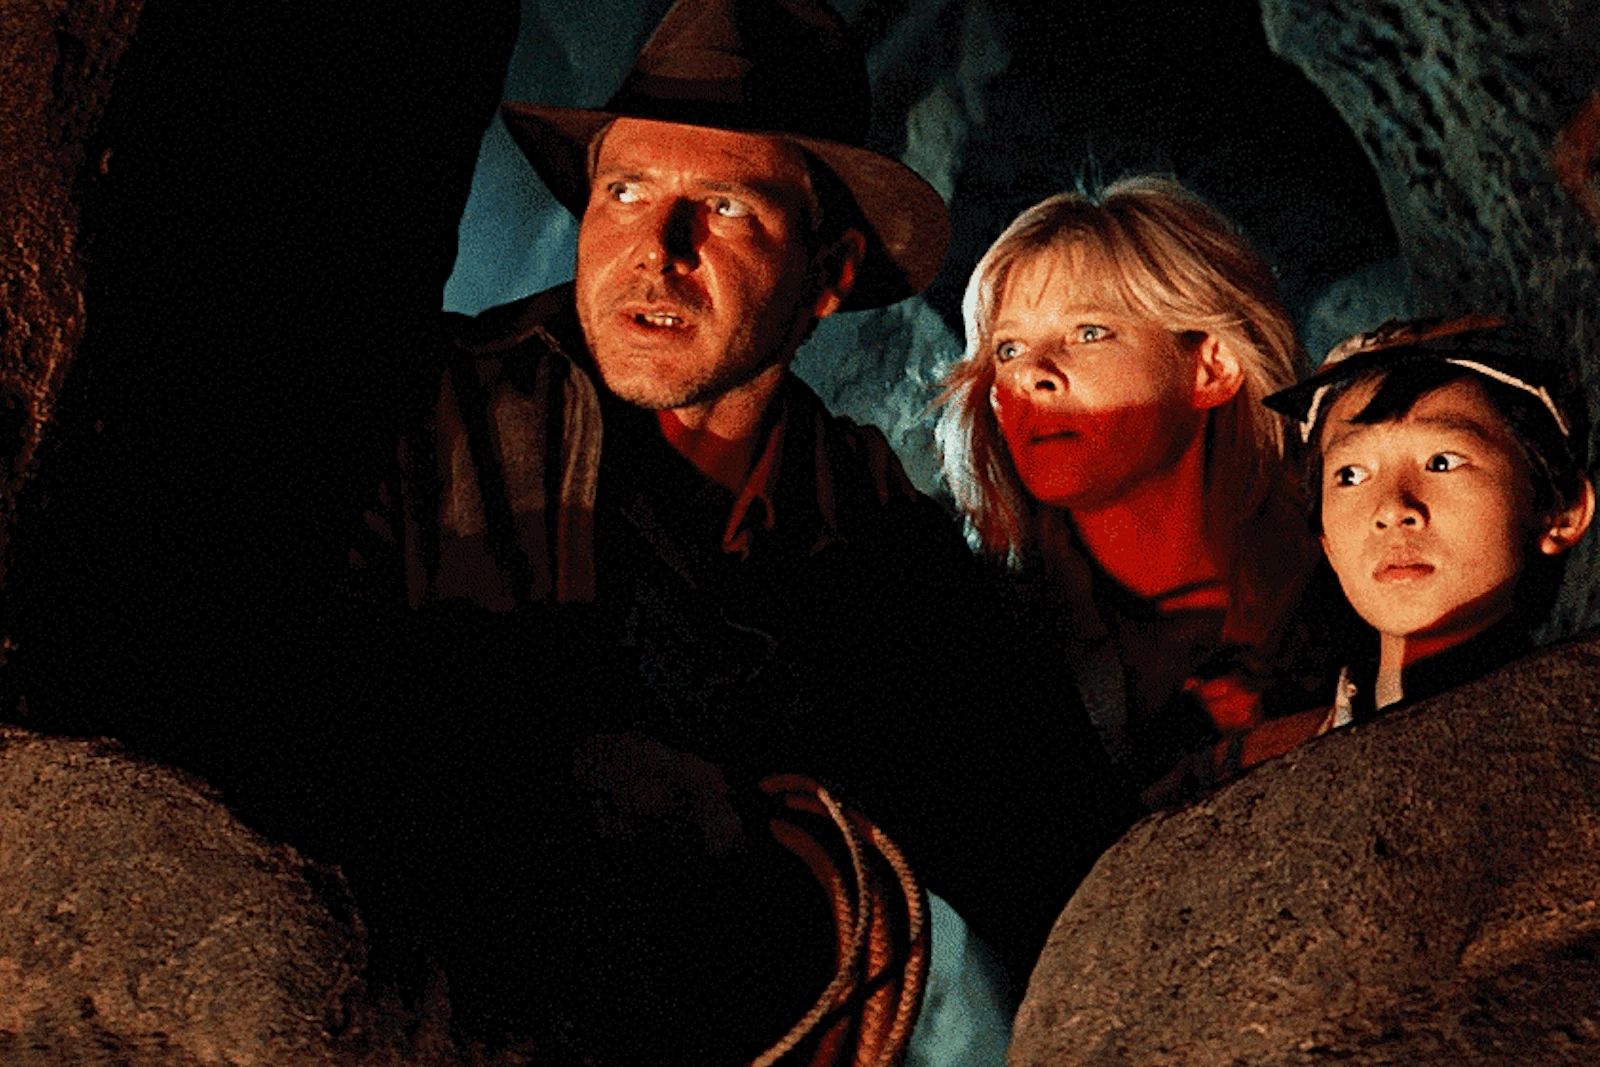 The concept of PG-13 rating came into existence only because of Indiana Jones and The Temple of Doom.